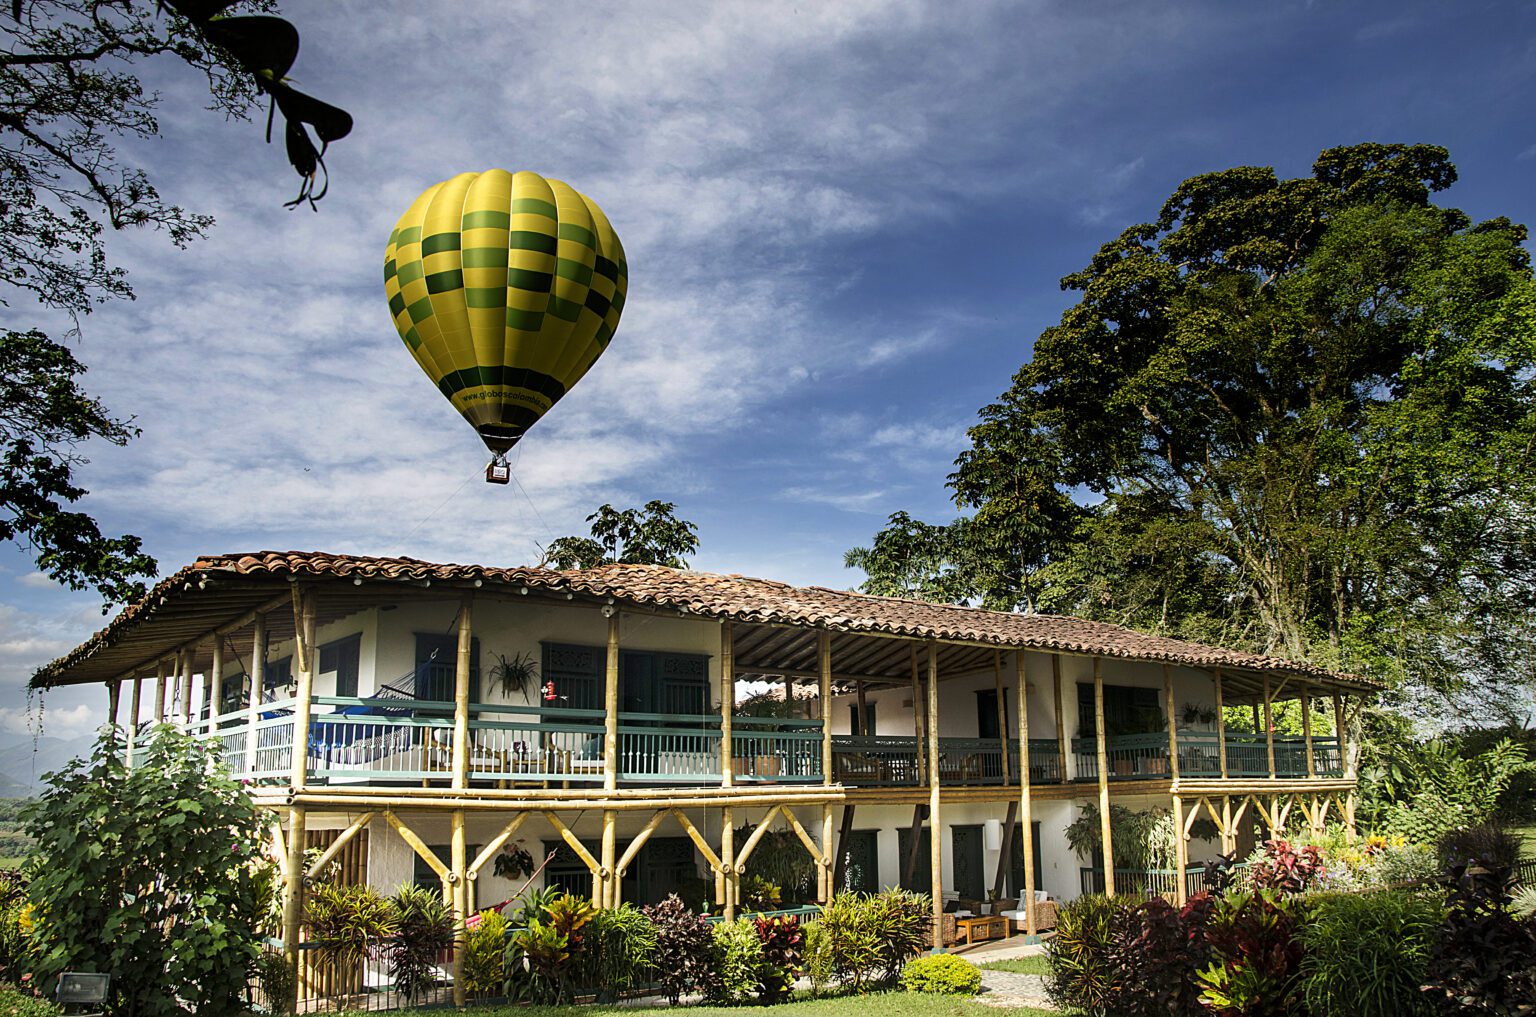 a house with a hot air balloon flying over it.